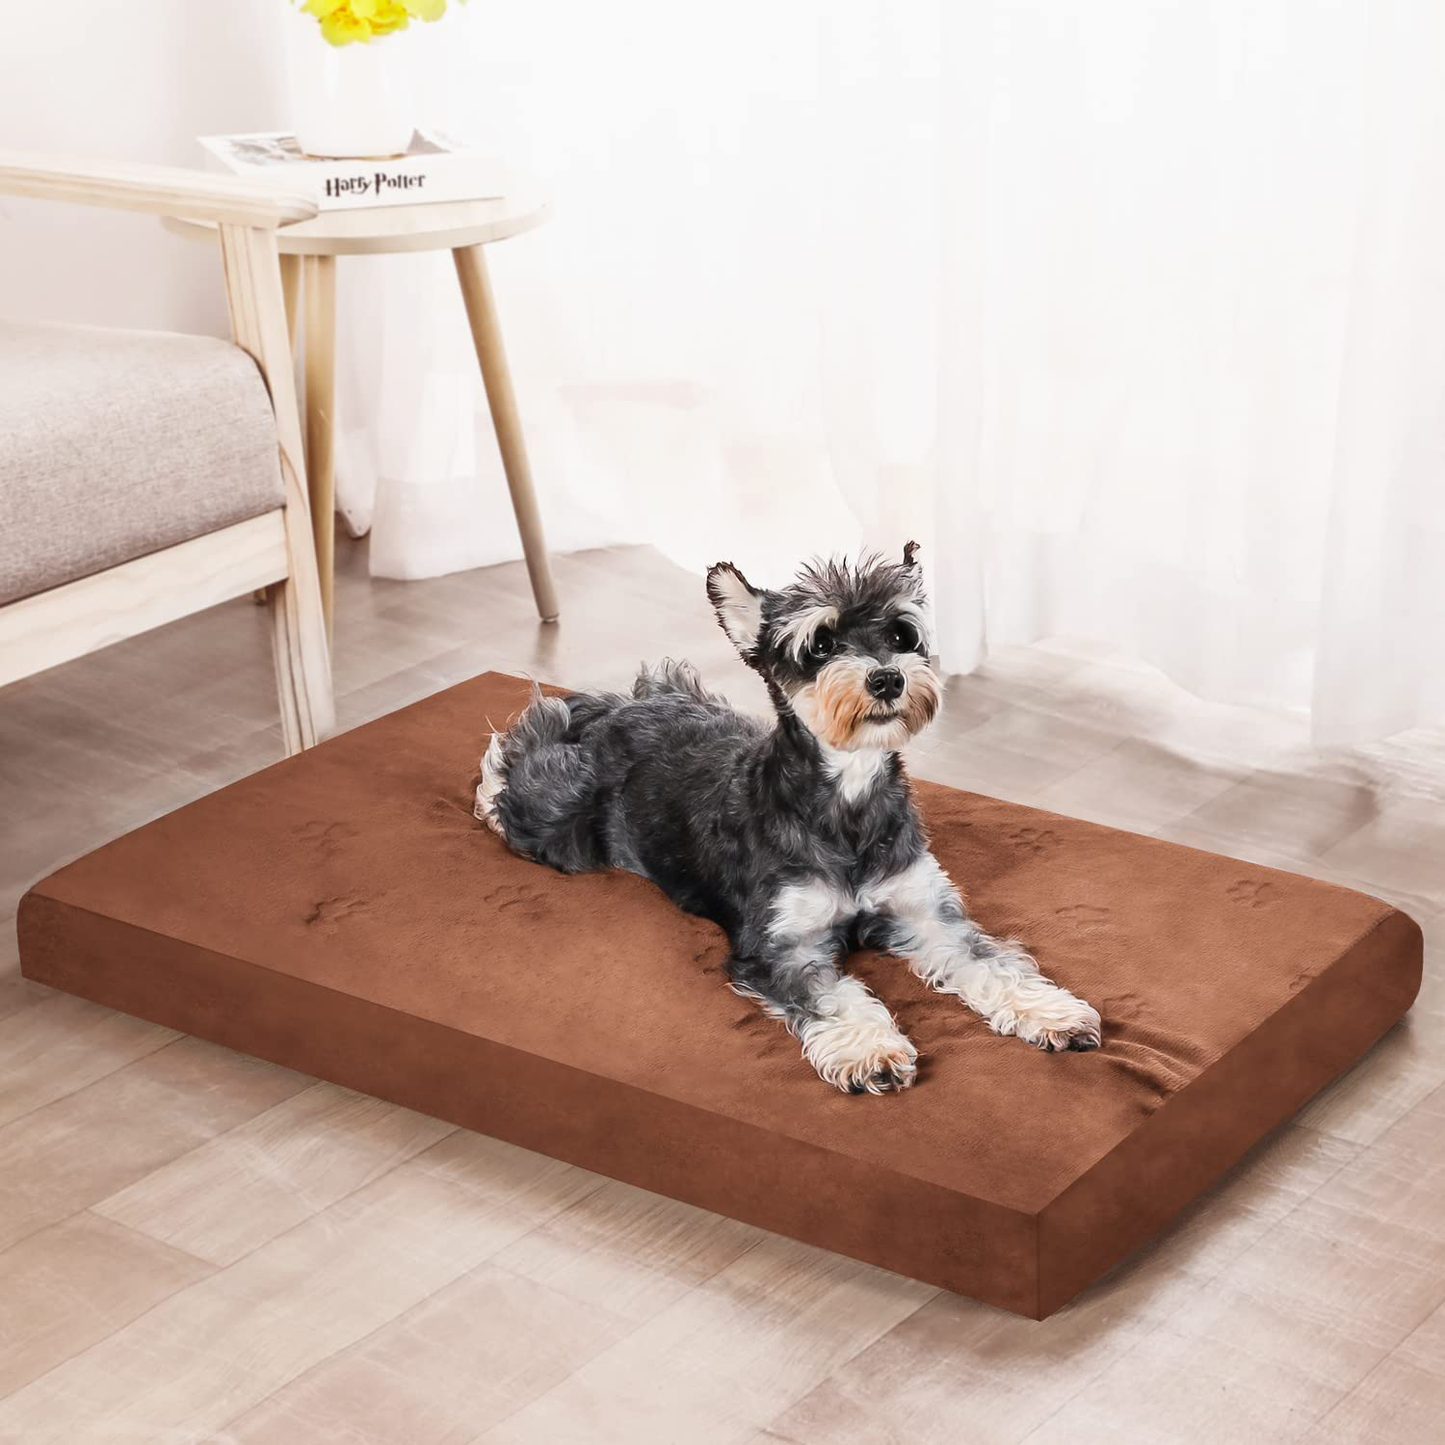 FONTEARY Dog Bed Mat for Large Medium Dogs Bed,Anti-Anxiety Orthopedic Pet Beds Memory Foam Cats&Dogs Kennel Bed with Removable Washable Cover and Waterproof Lining